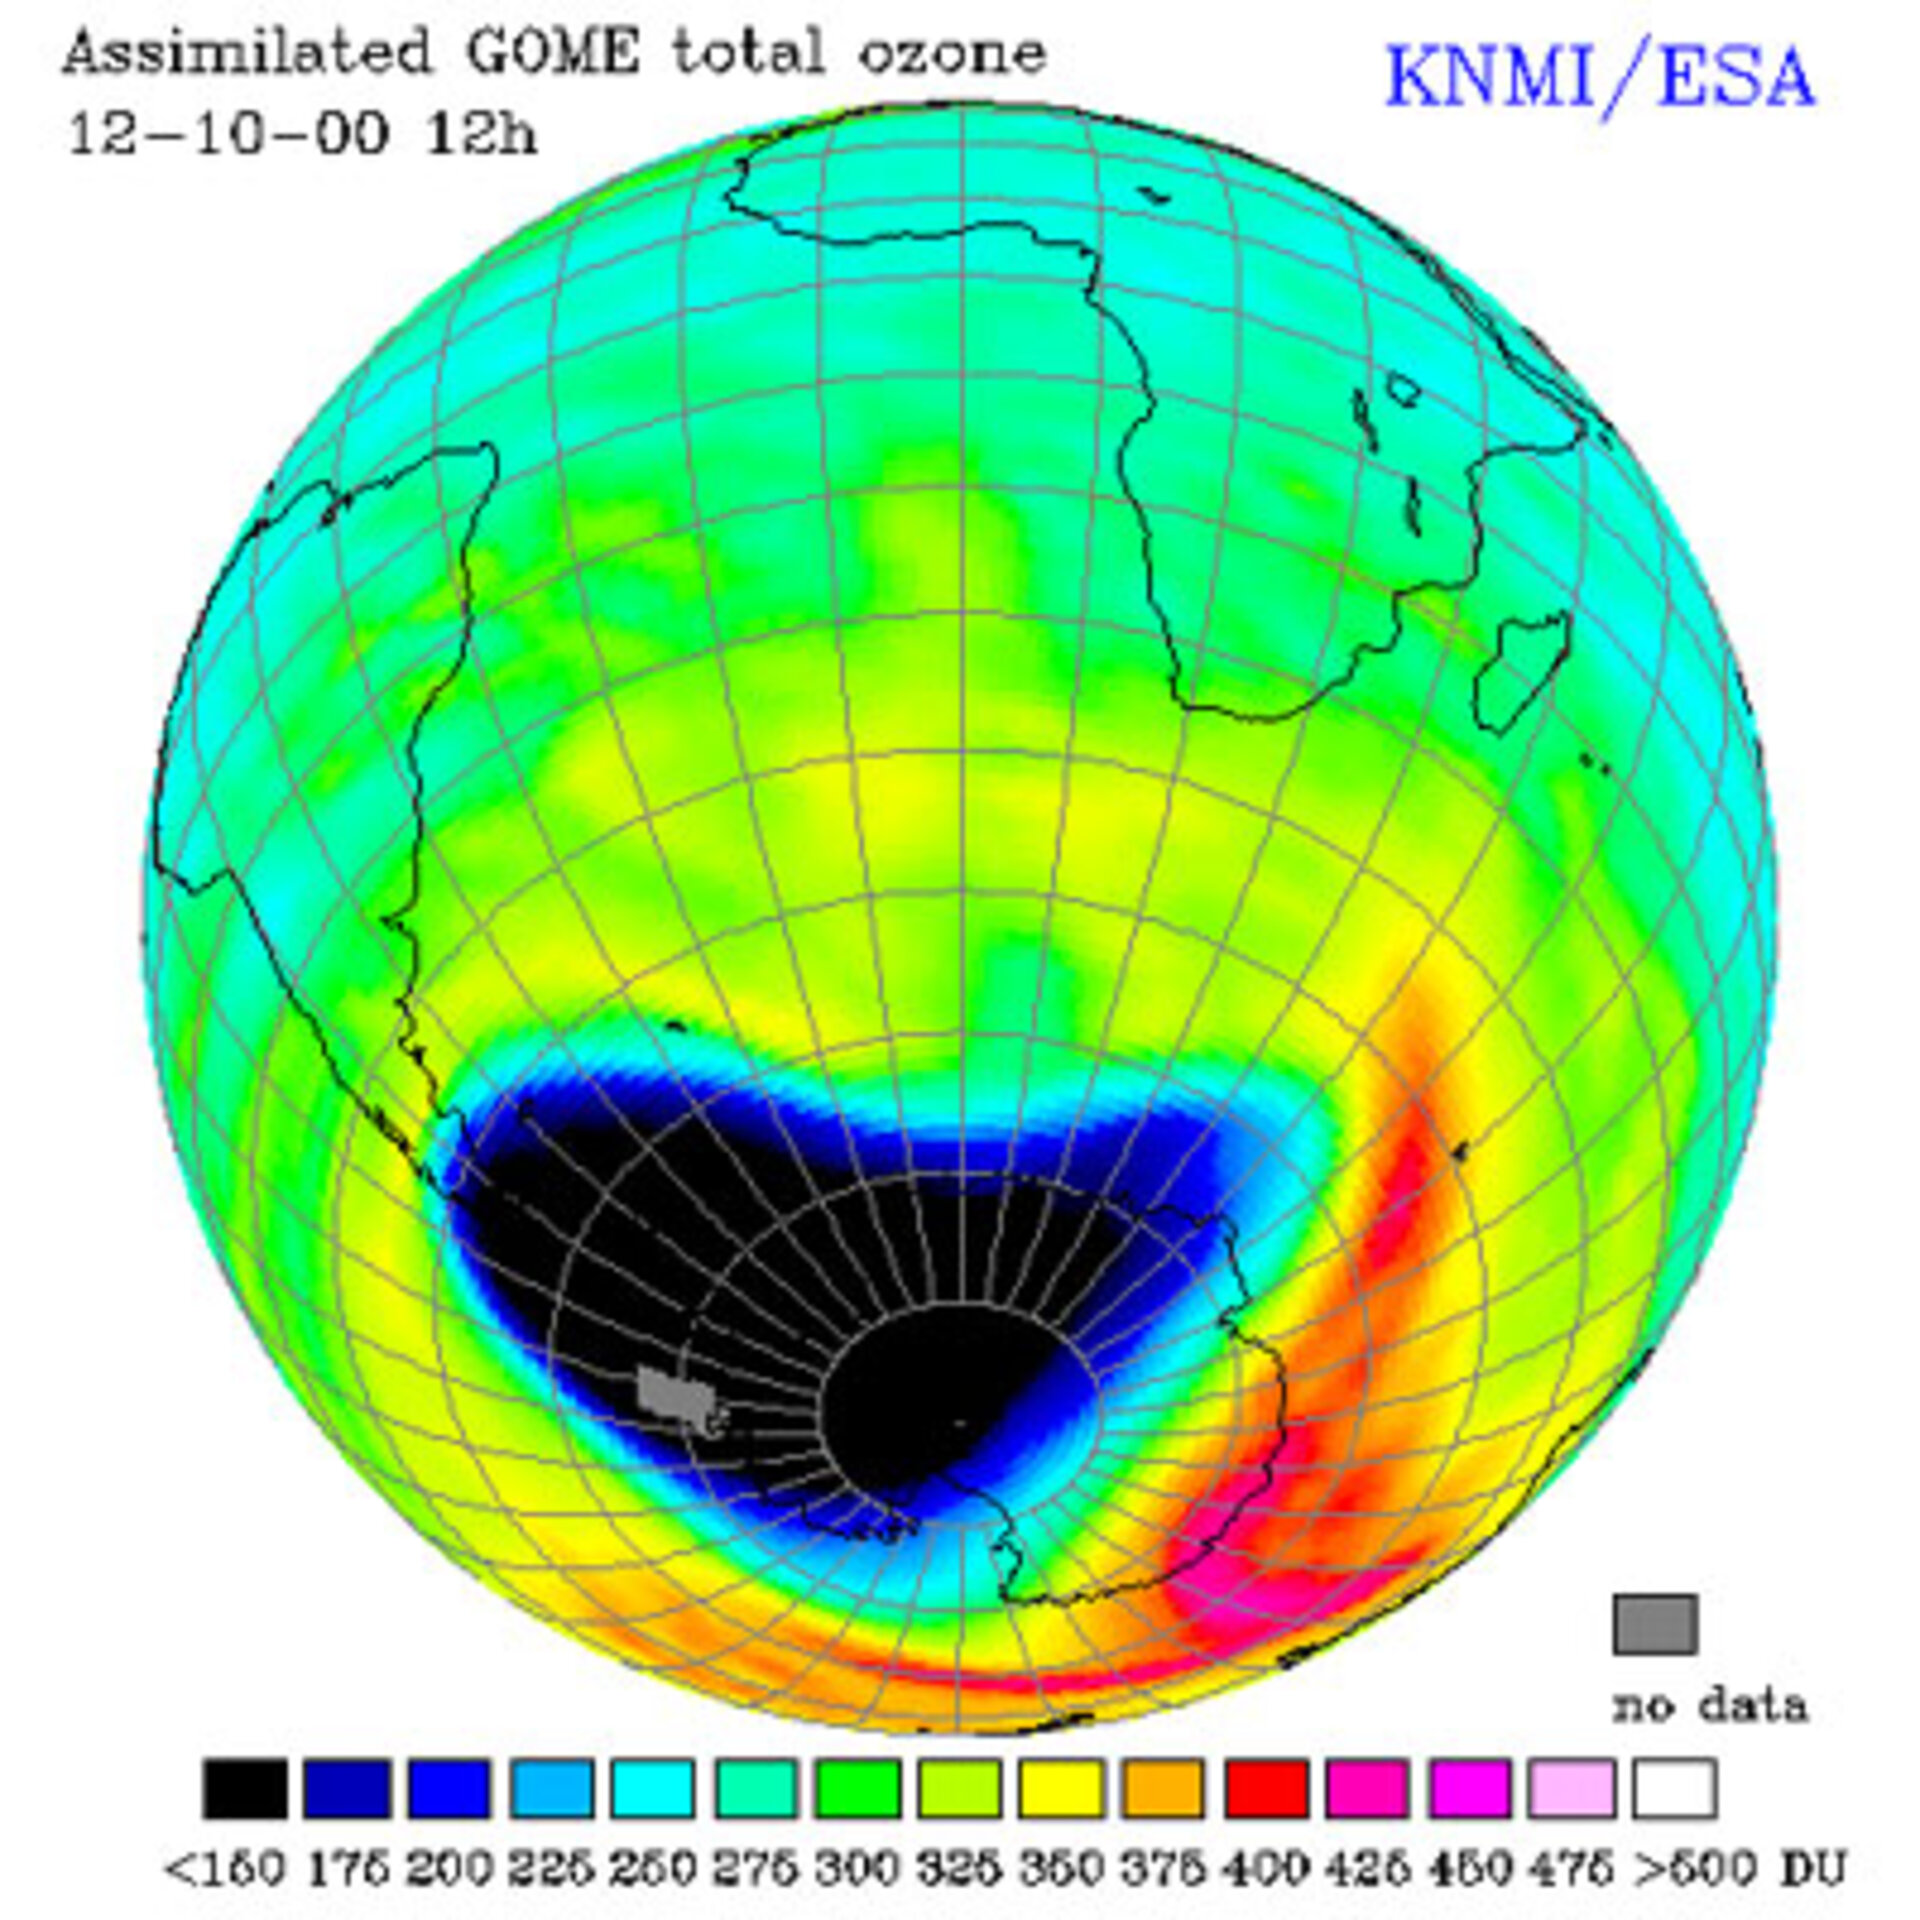 Record Ozone Hole Extension during 2000